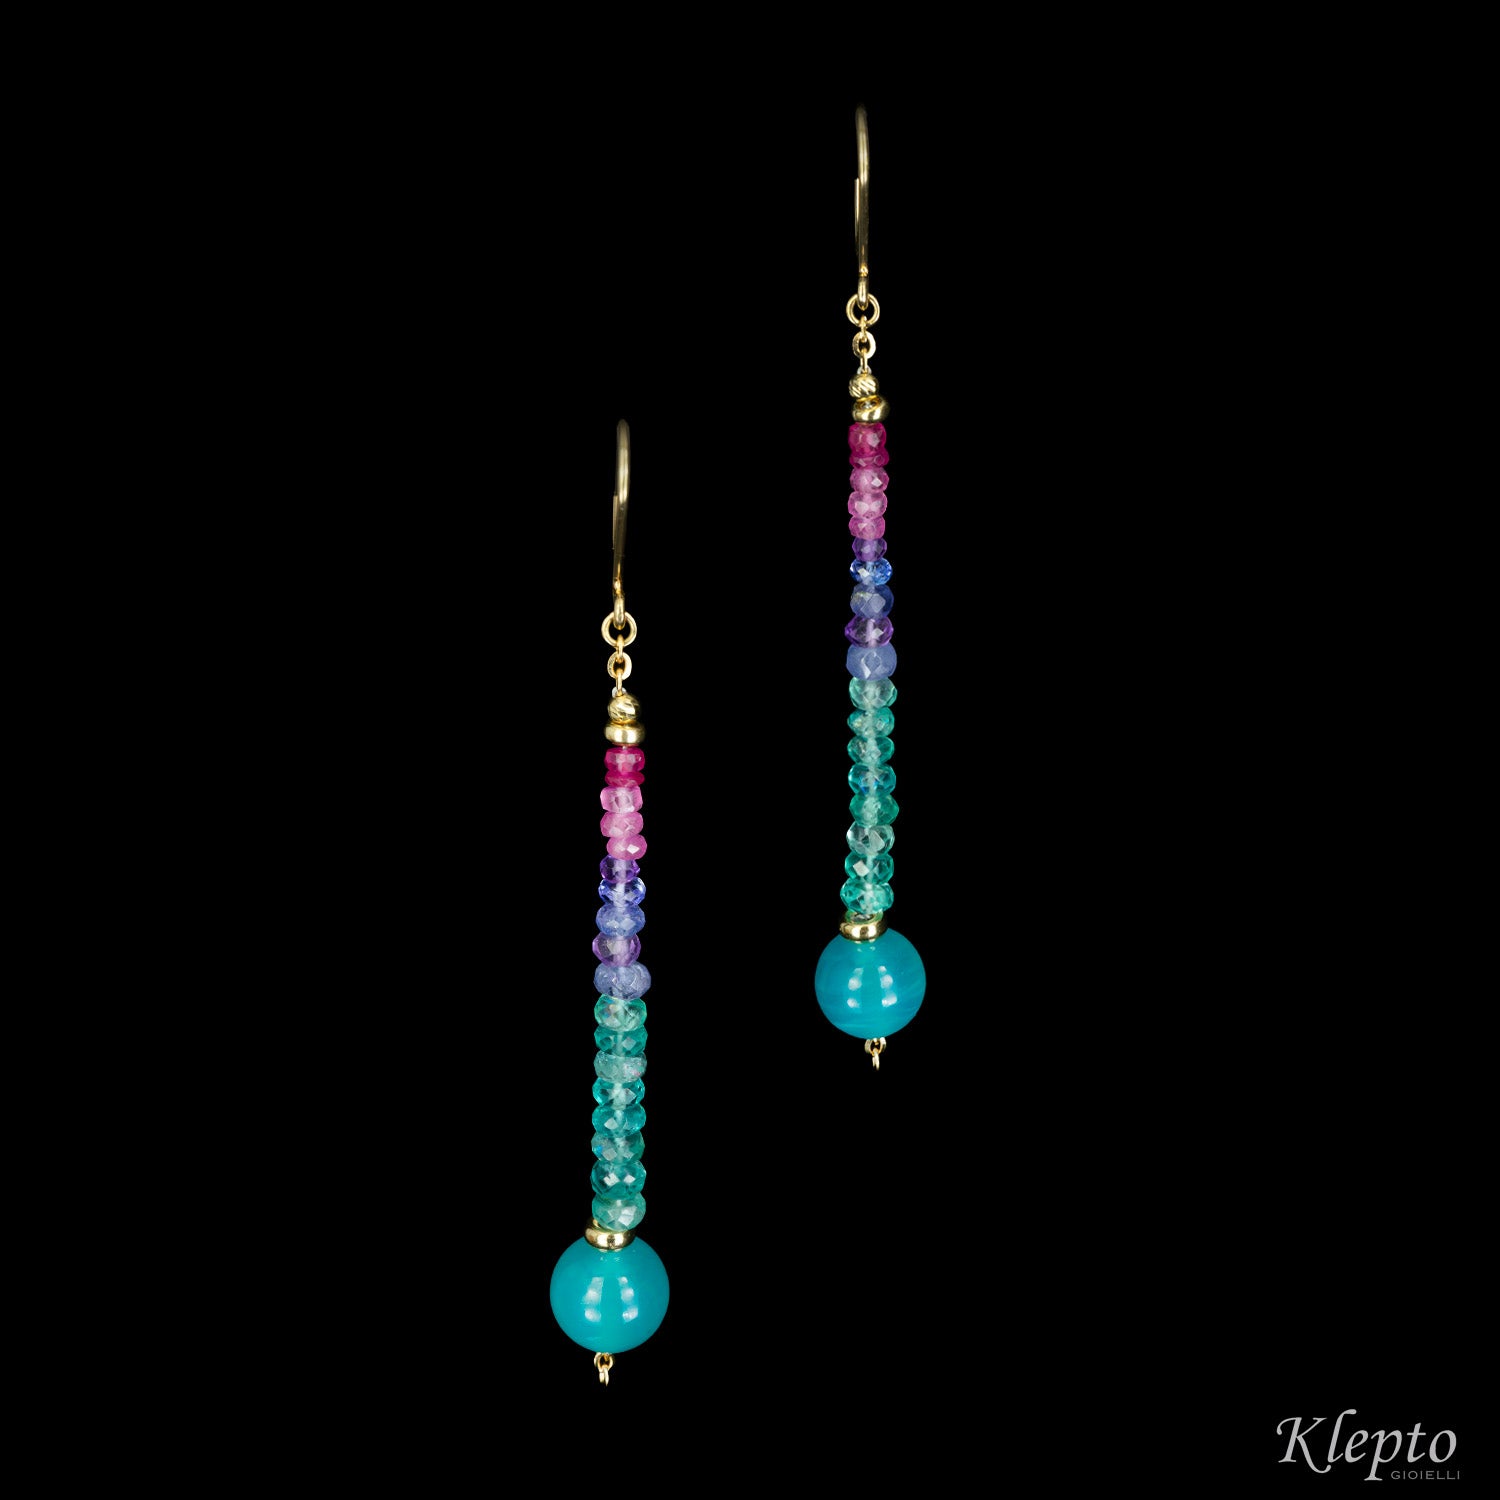 Rainbow yellow gold earrings with stones